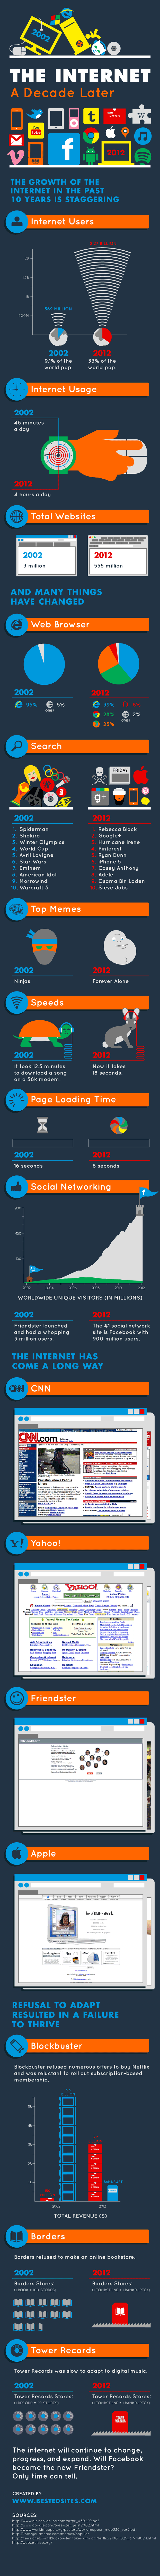 The Internet A Decade Later (infographic)